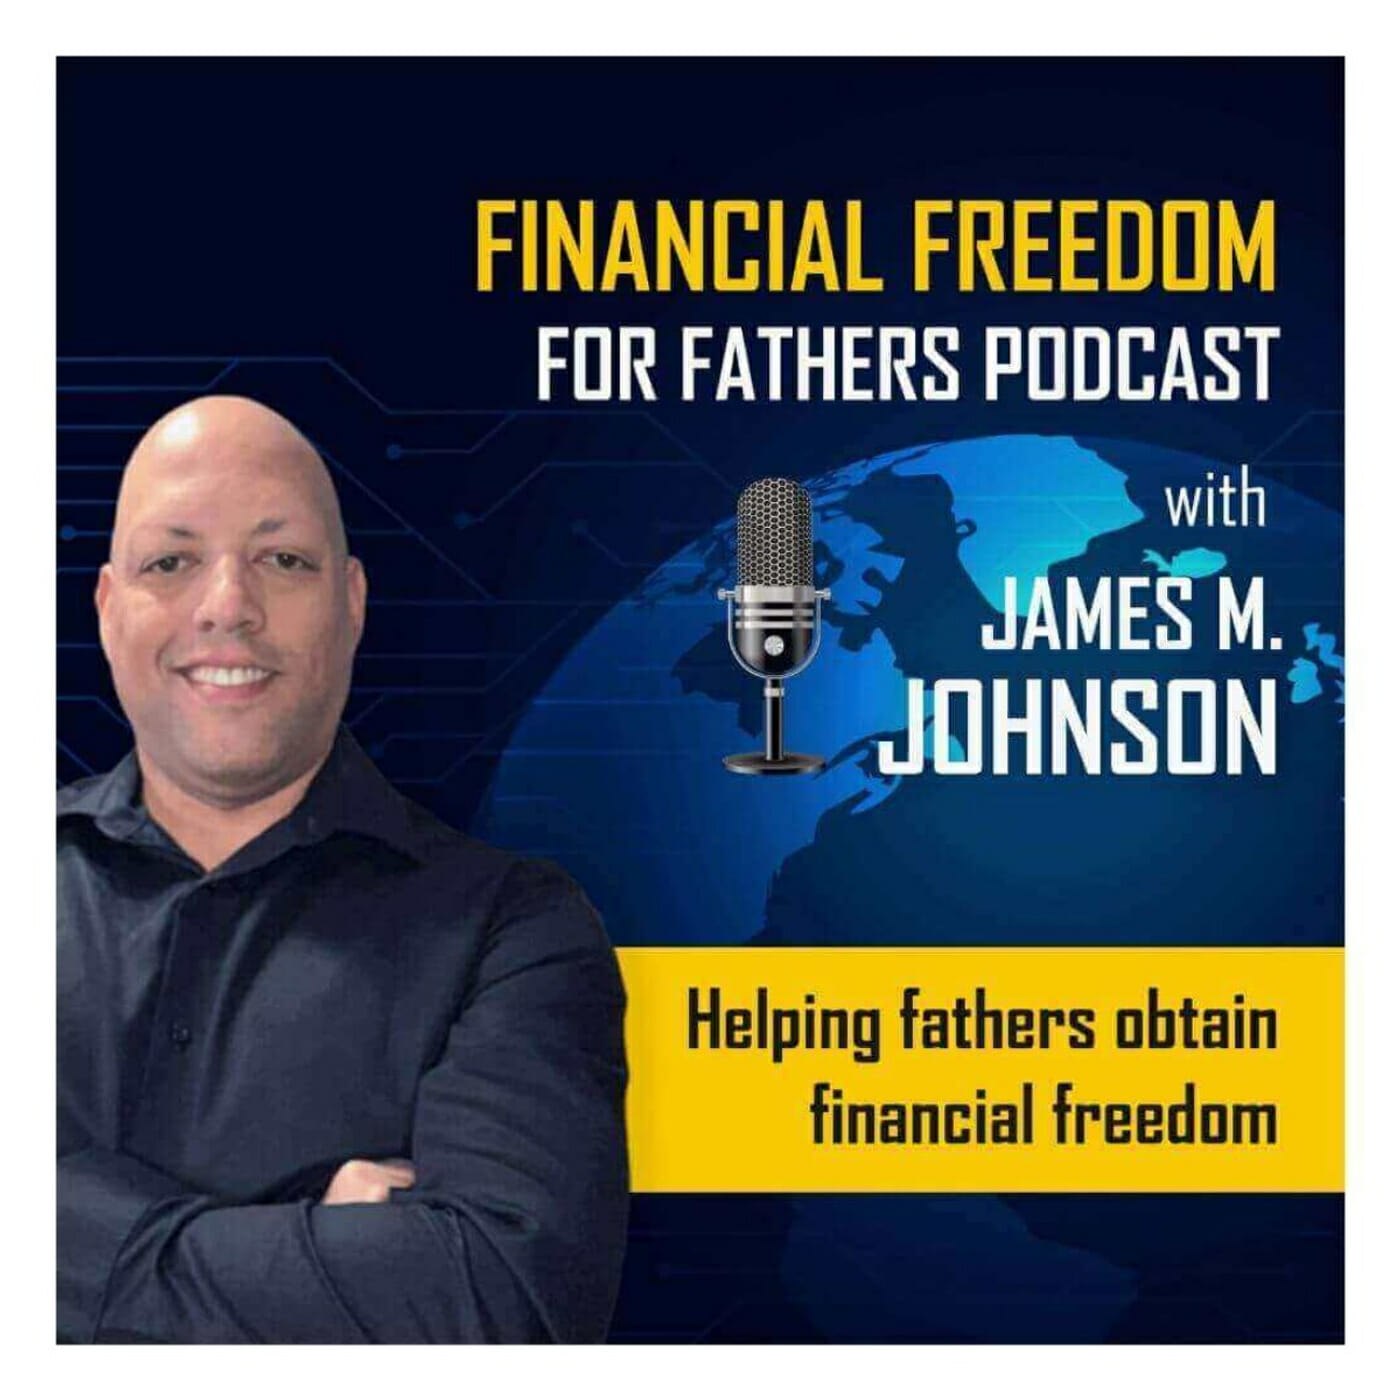 Financial freedom for fathers podcast